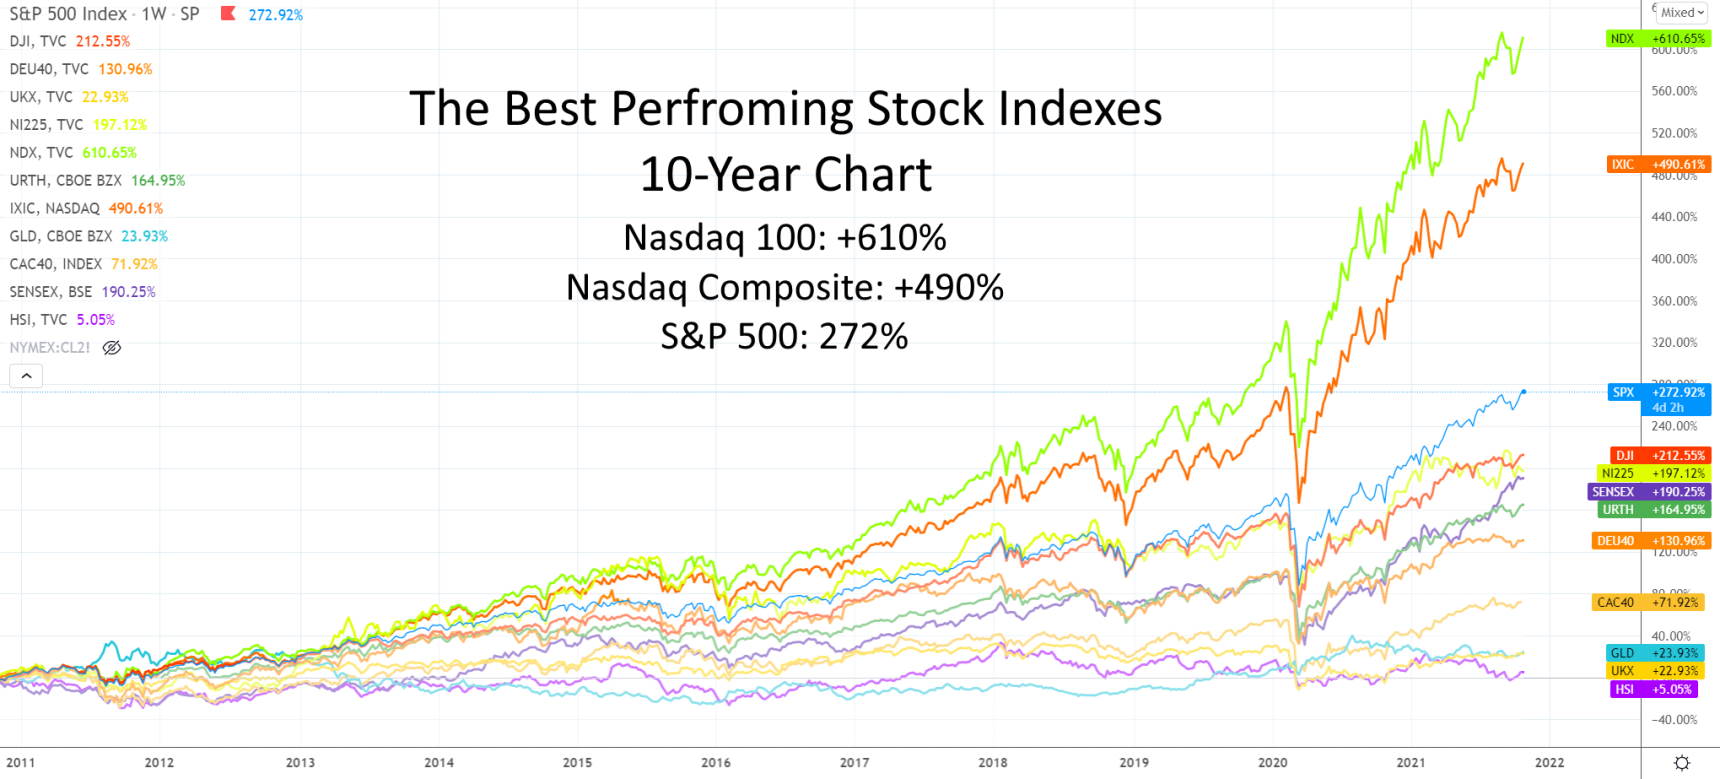 The Best Performing Stock Index Funds: 10-Year Chart to 2022